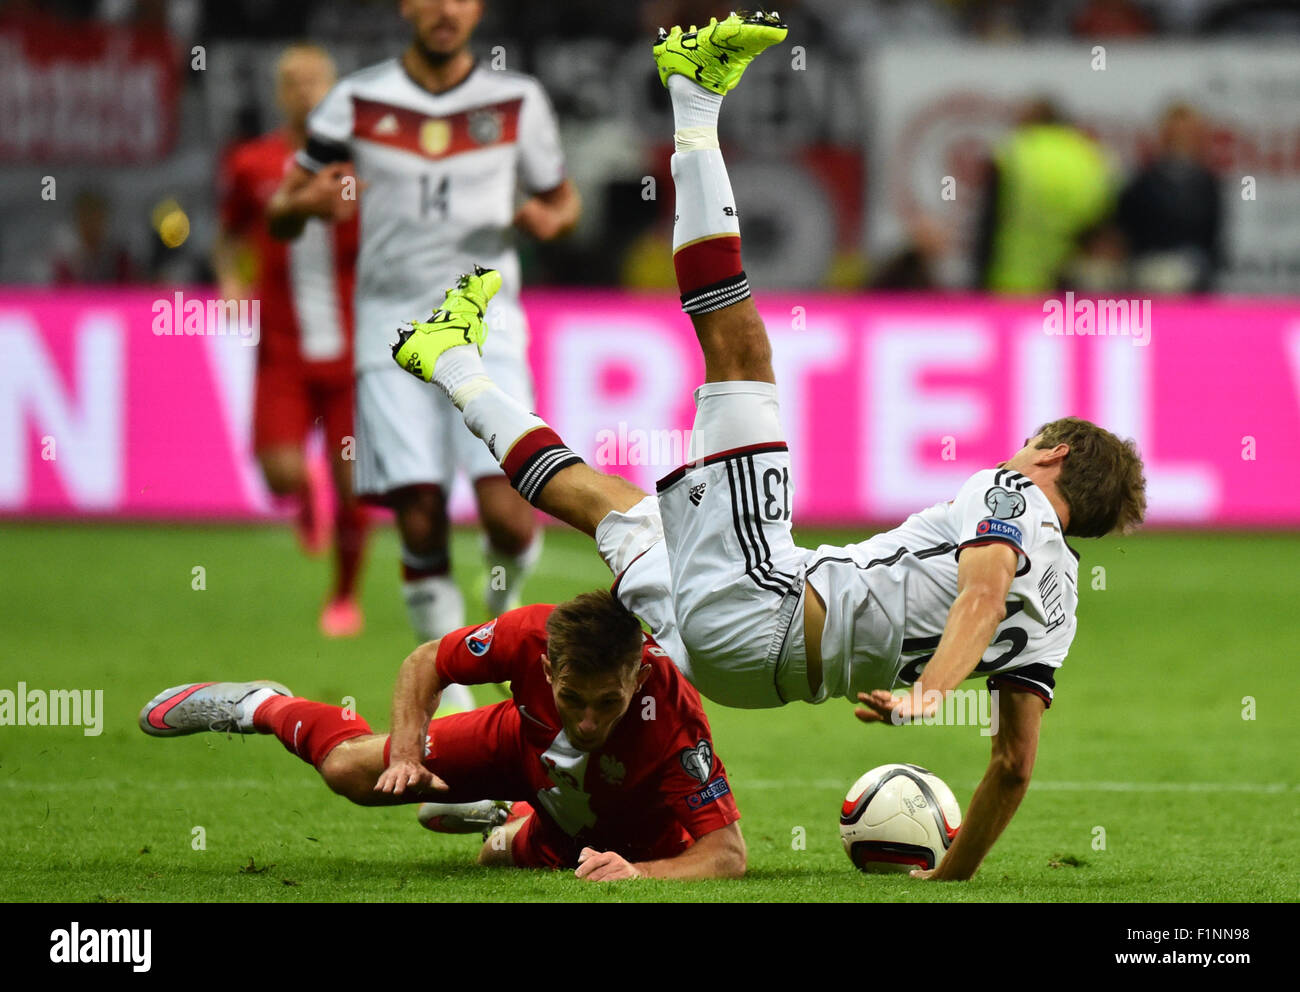 Germany's Thomas Mueller (top) and Poland'S Maciej Rybus compete for the ball during the Group D qualifier for the European Championships at the Commerzbank-Arena in Frankfurt am Main, Germany, 4 September 2015. PHOTO: UWE ANSPACH/DPA Stock Photo